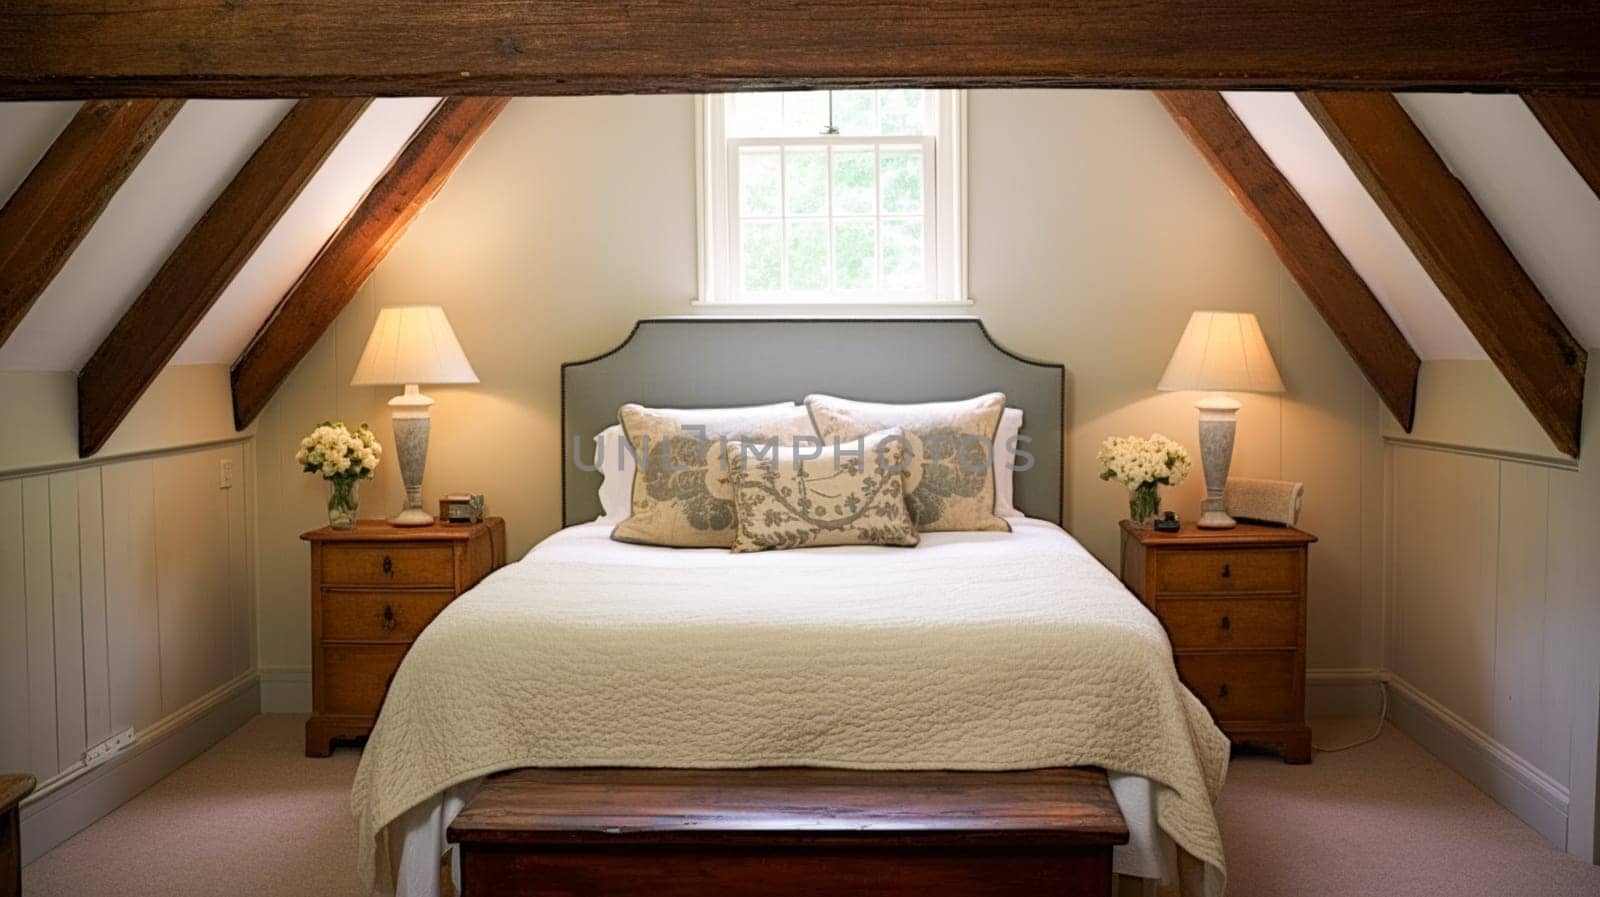 Farmhouse bedroom decor, interior design and home decor, bed with elegant bedding and bespoke furniture, English country house, holiday rental and cottage style inspiration